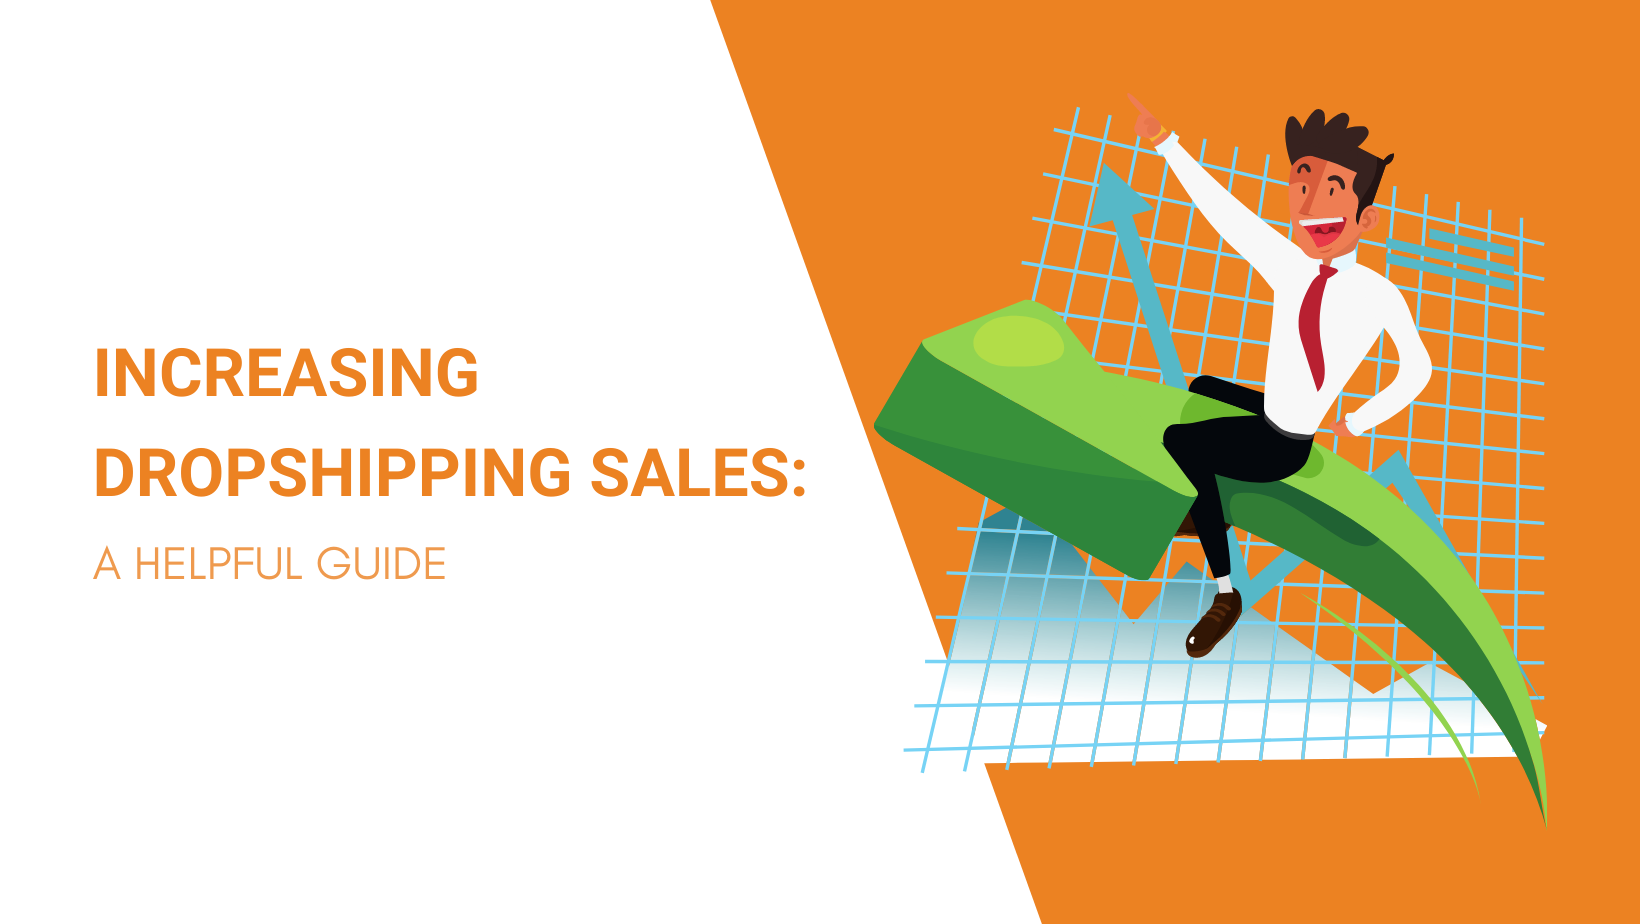 INCREASING DROPSHIPPING SALES A HELPFUL GUIDE